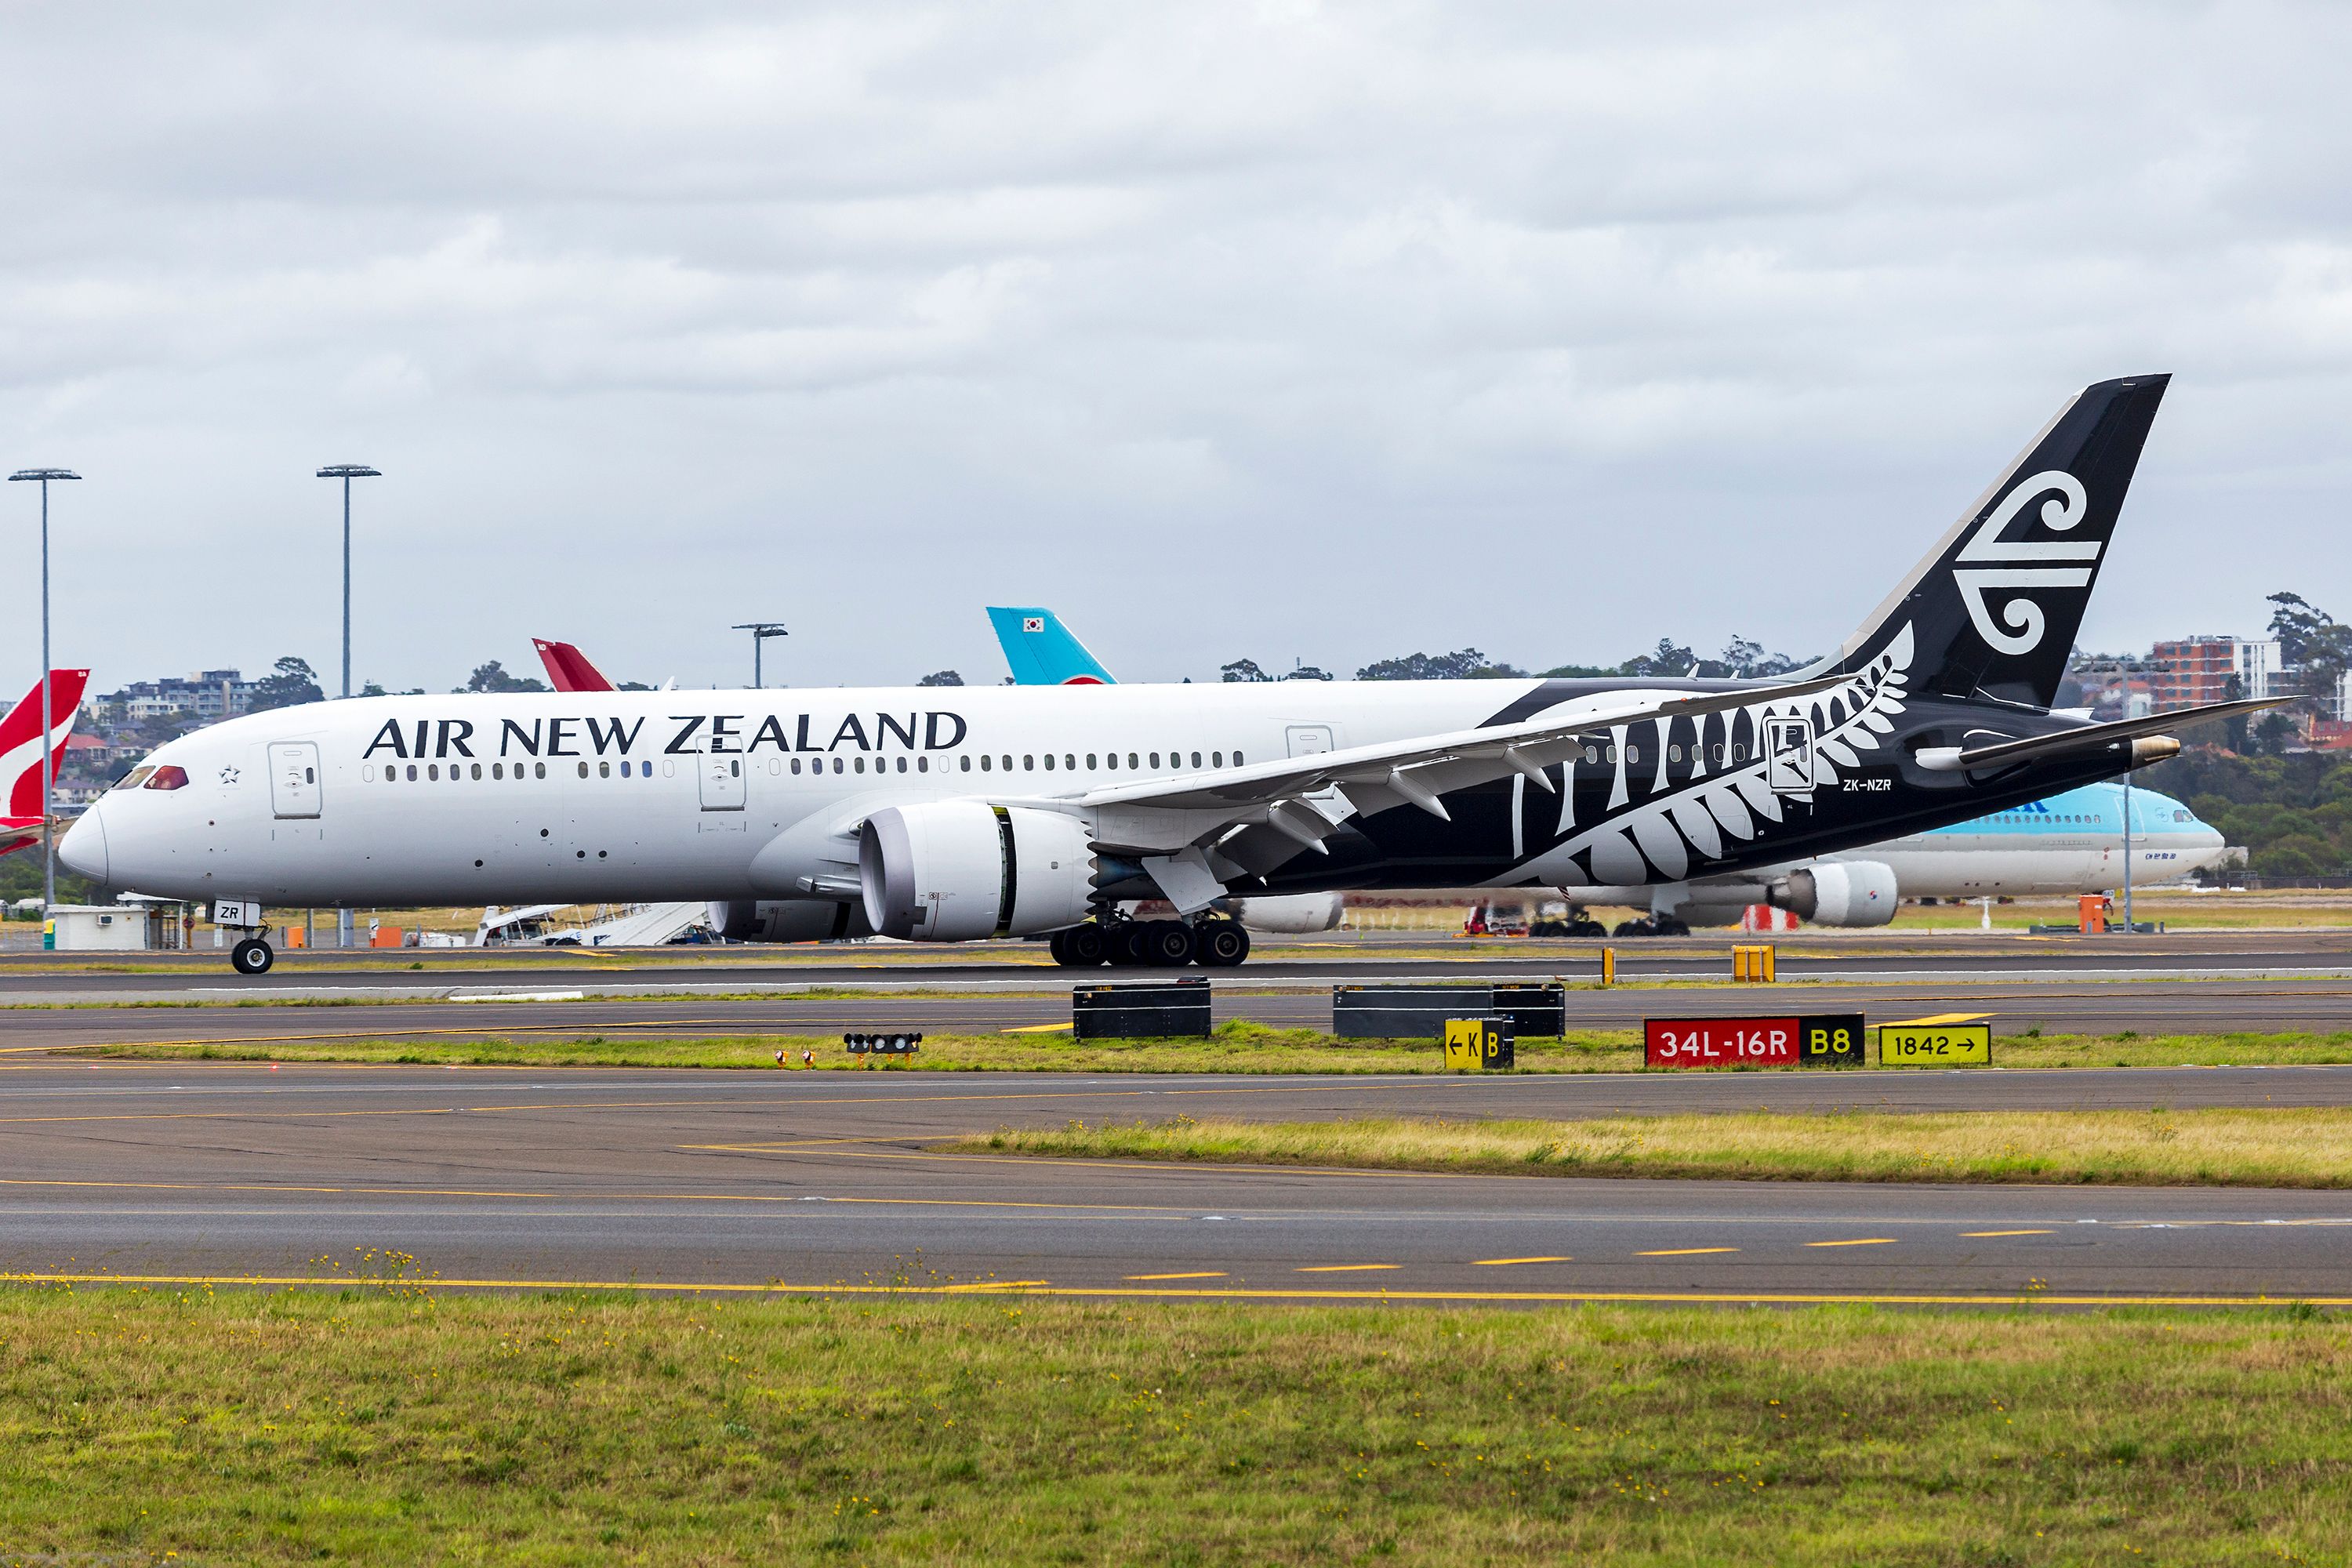 Air New Zealand (ZK-NZR) Boeing 787-9 Dreamliner at Sydney Airport